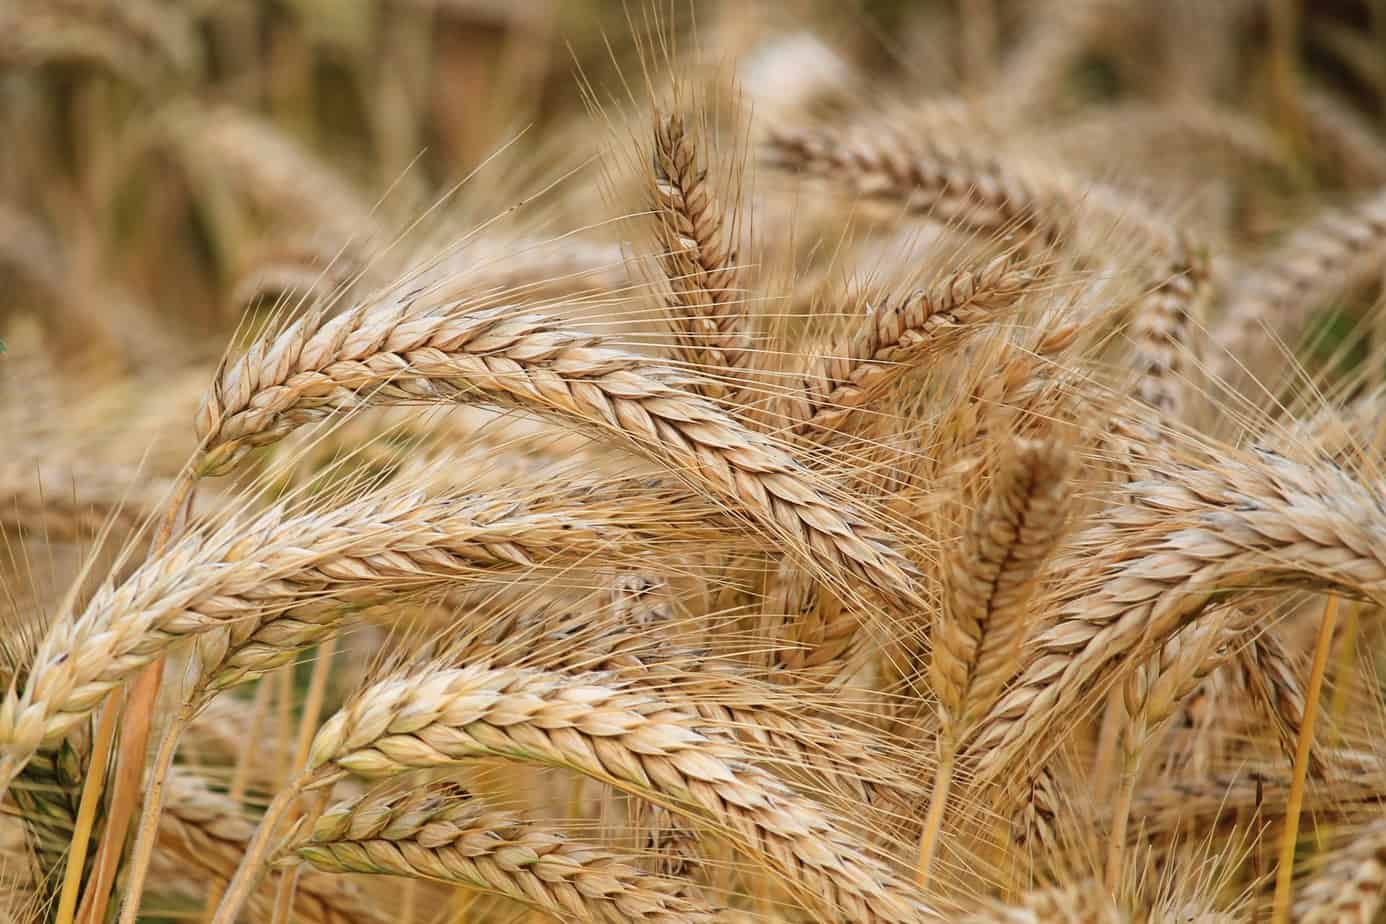 Is Wheat Toxic? Is Wheat GMO? The Answers Will Surprise You